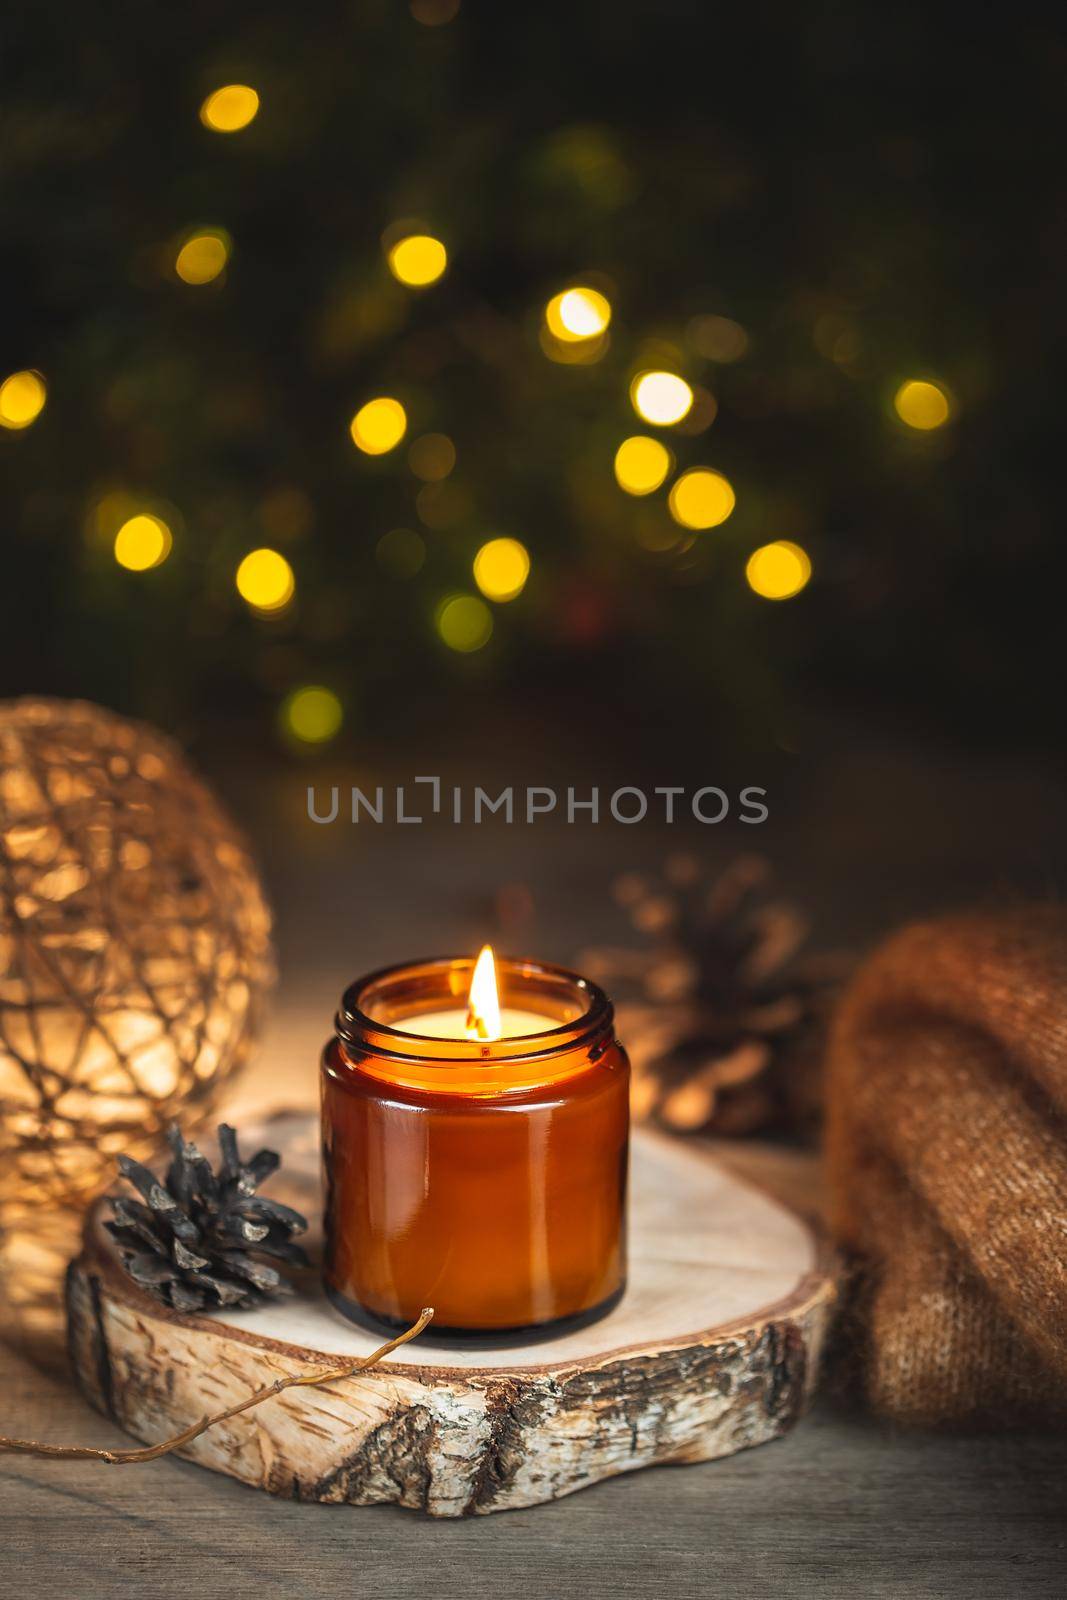 Cozy winter evening card with burning aroma candle in a dark glass jar over blurred bokeh lights on the background. Soft focus, copy space for text. Christmas holiday at home.